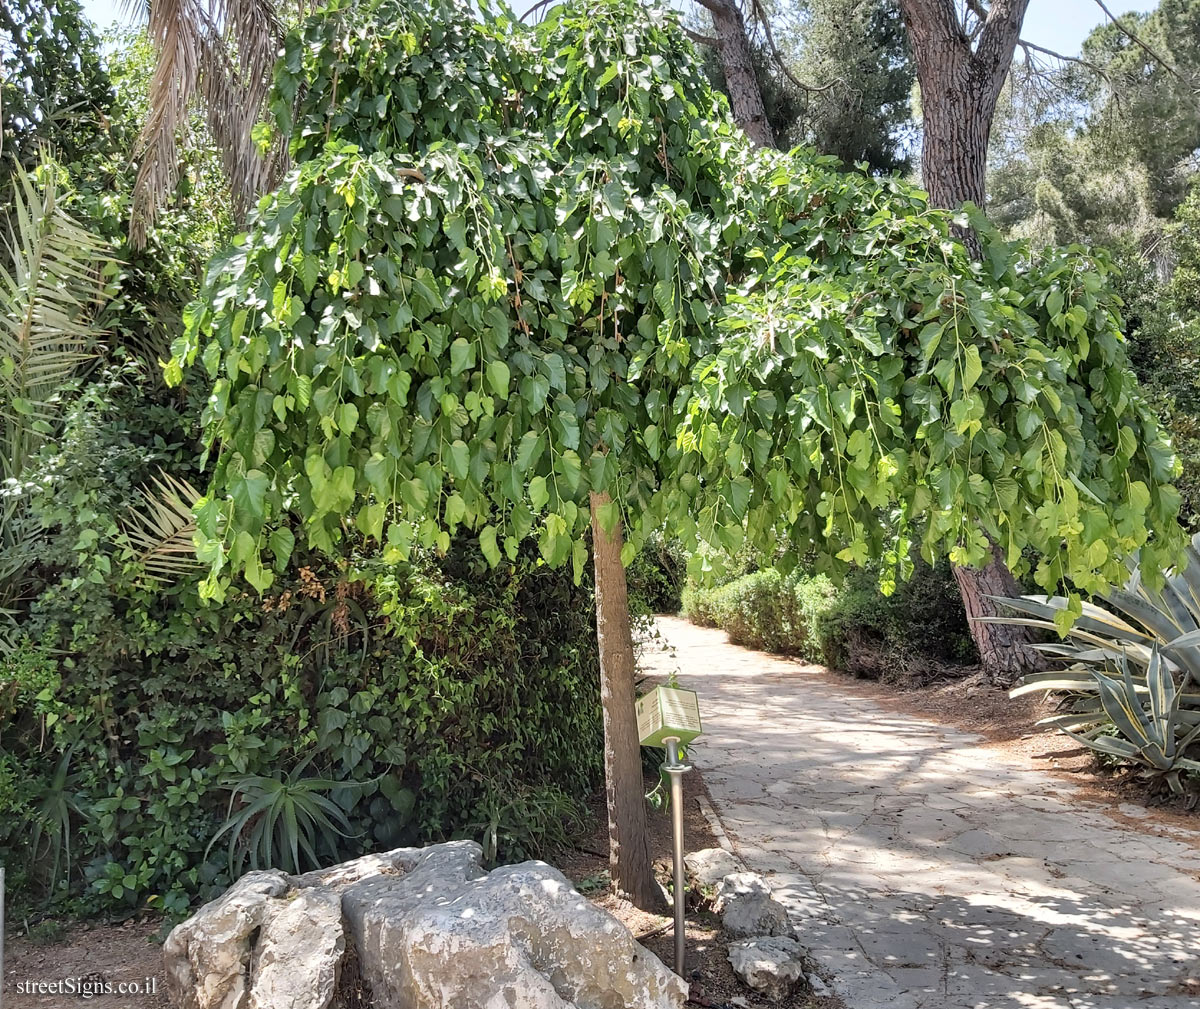 The Hebrew University of Jerusalem - Discovery Tree Walk - White Mulberry - Safra Campus